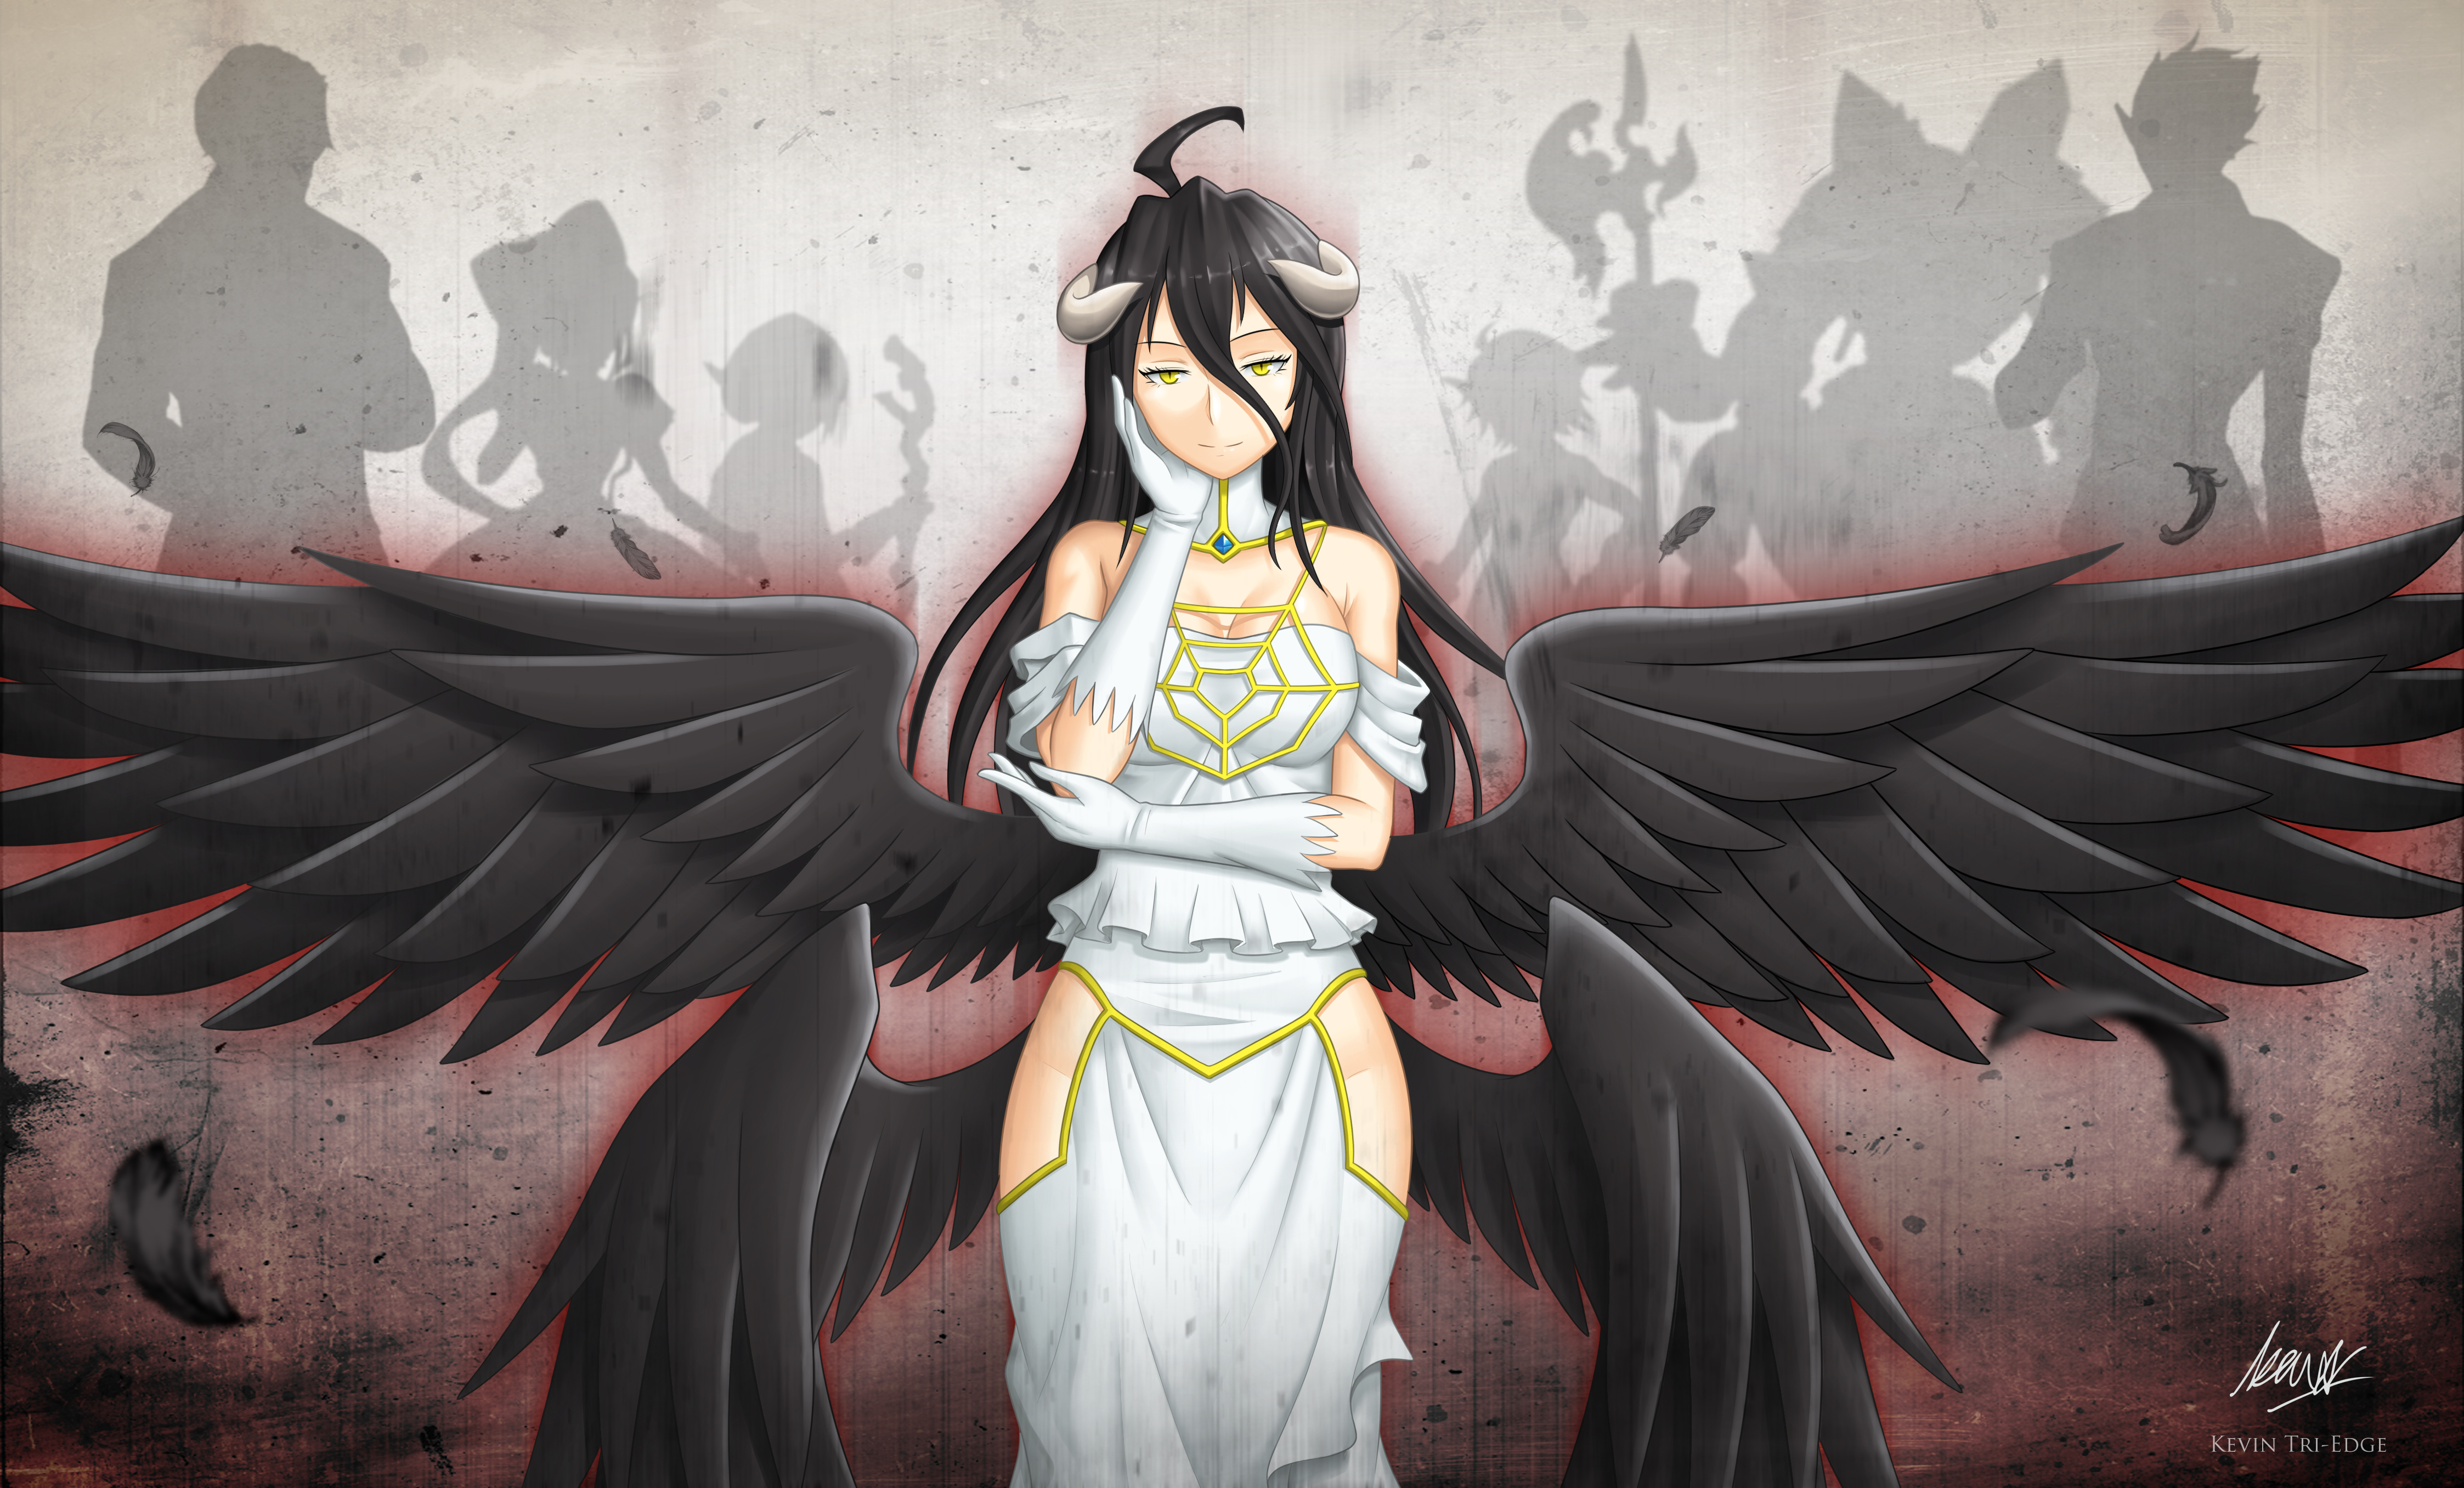 Free Download Anime Overlord Overlord Demiurge Cocytus Mare Bello Fiore Aura Bella 4492x2713 For Your Desktop Mobile Tablet Explore 49 Overlord Anime Albedo Wallpaper Overlord Anime Albedo Wallpaper Overlord